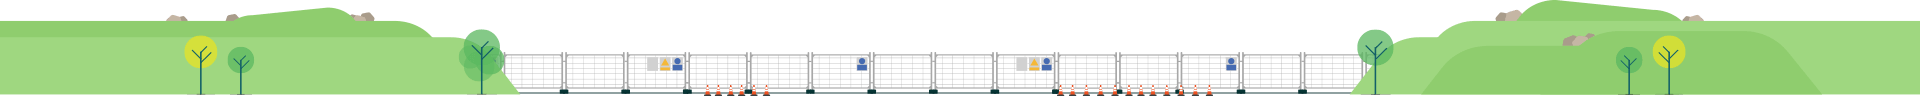 Foreground scenery - protective fence and constriction site